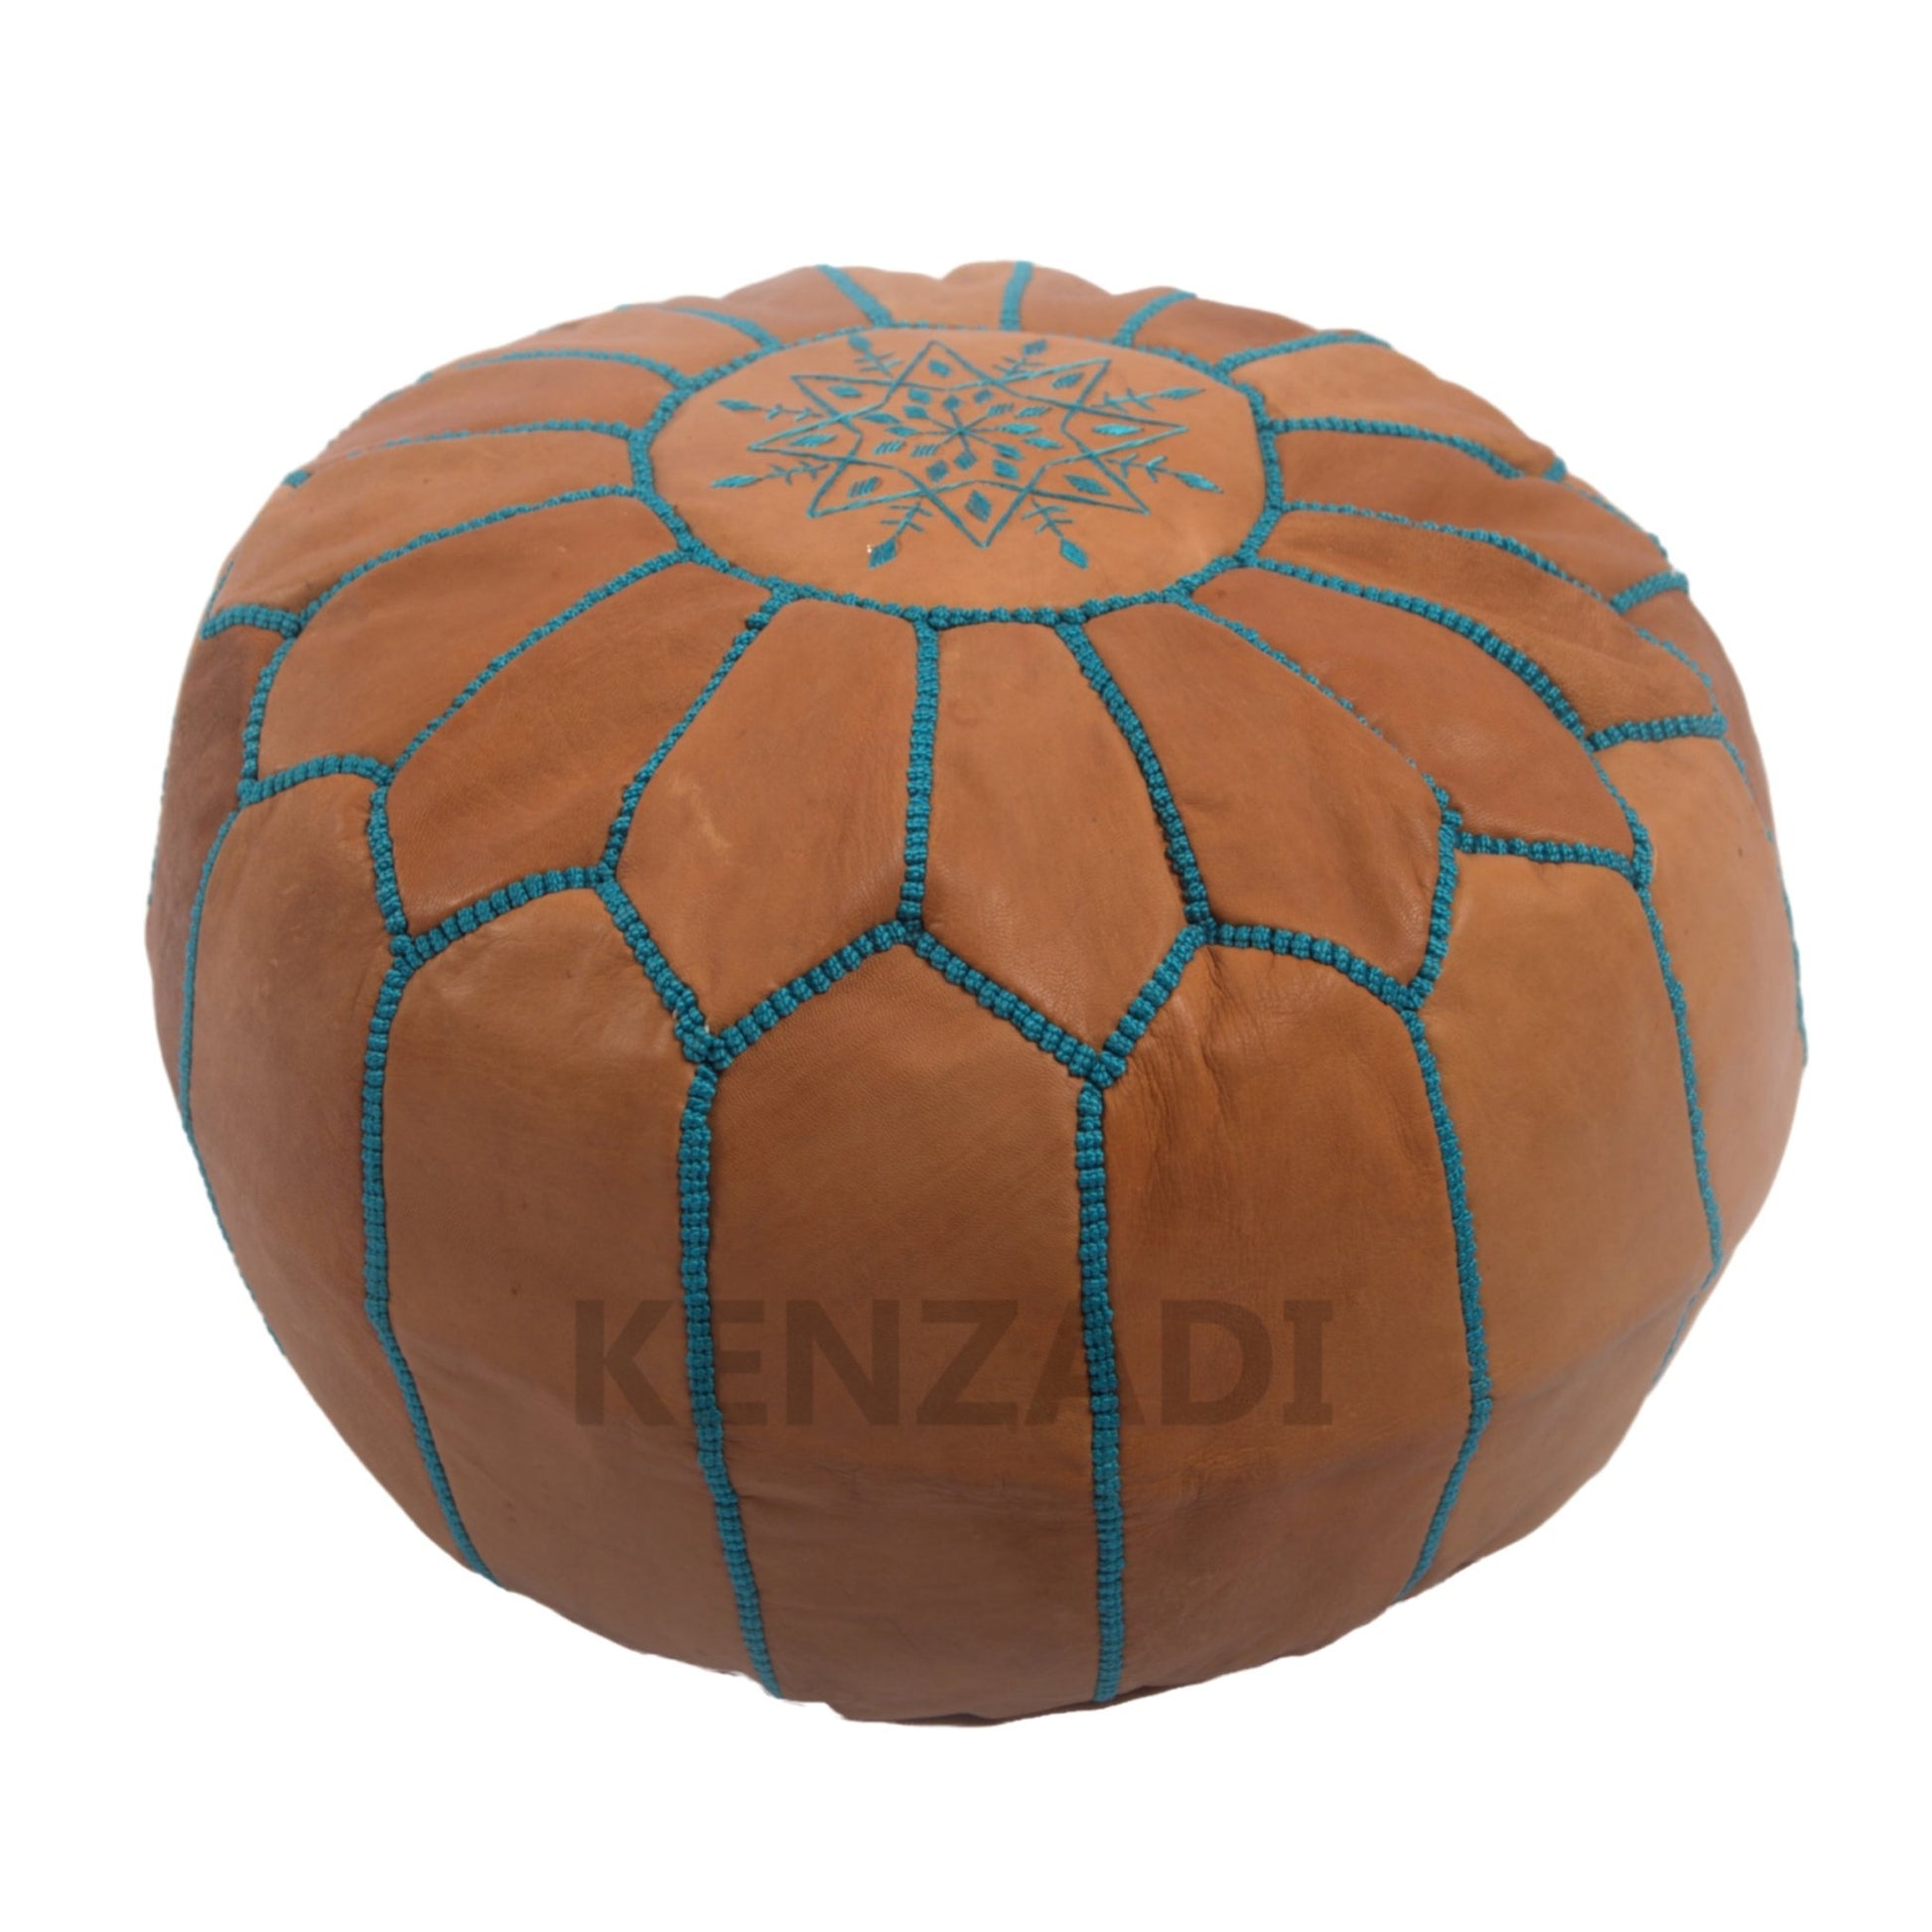 Moroccan leather pouf, round pouf, berber pouf, Light Brown with Light blue embroidery by Kenzadi - Handmade by My Poufs